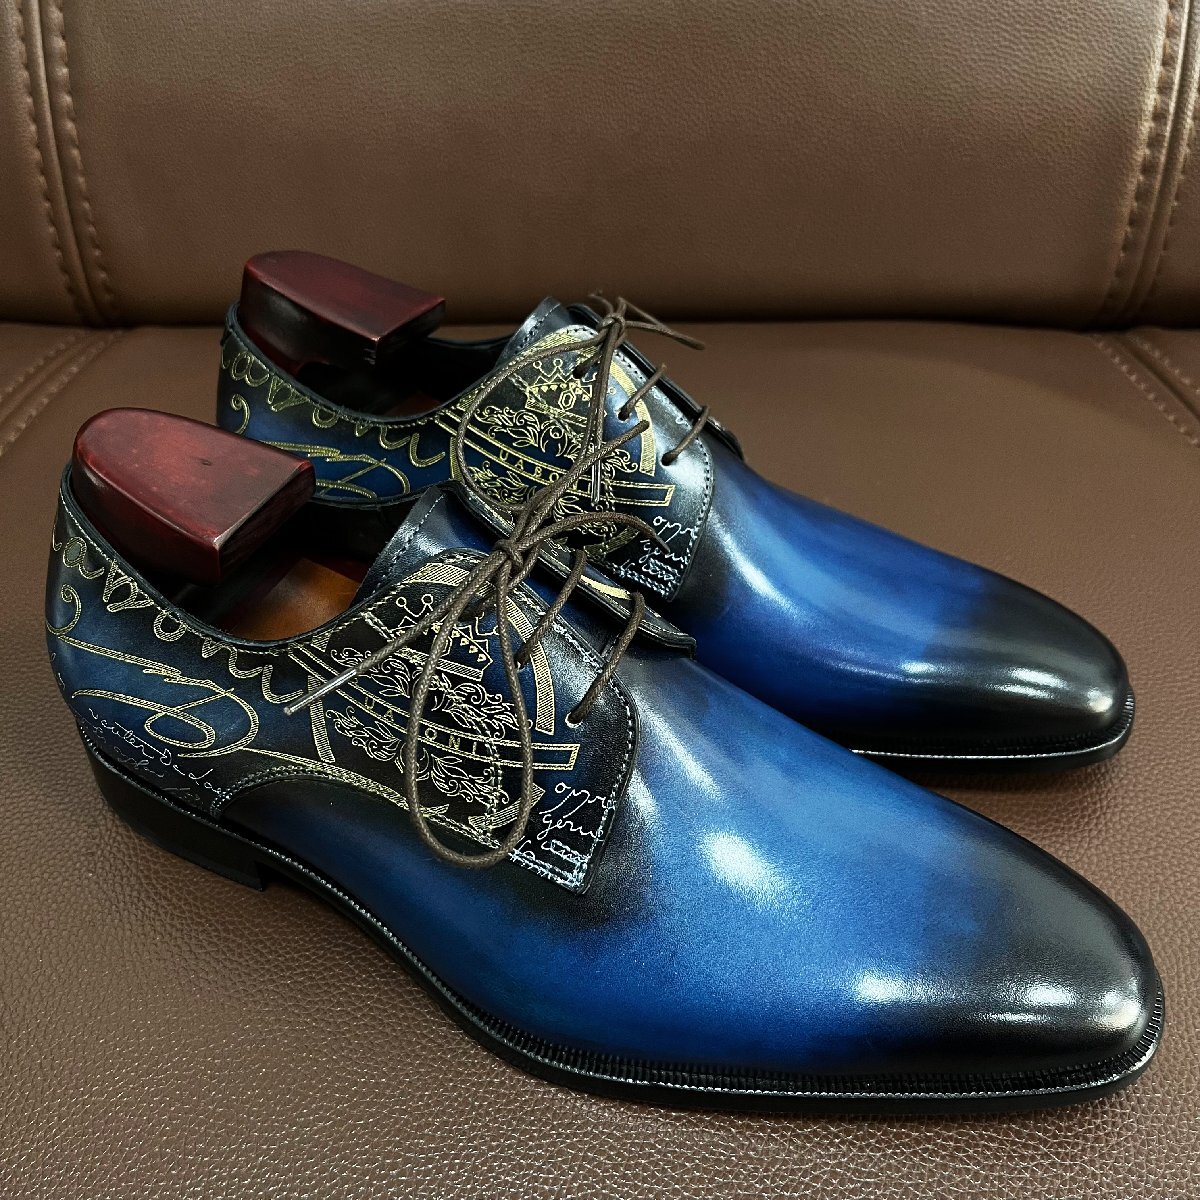  valuable EU made regular price 28 ten thousand special order limited goods *UABONI* business shoes *yuaboni* hand made handmade hand . leather original leather commuting formal gentleman 25.